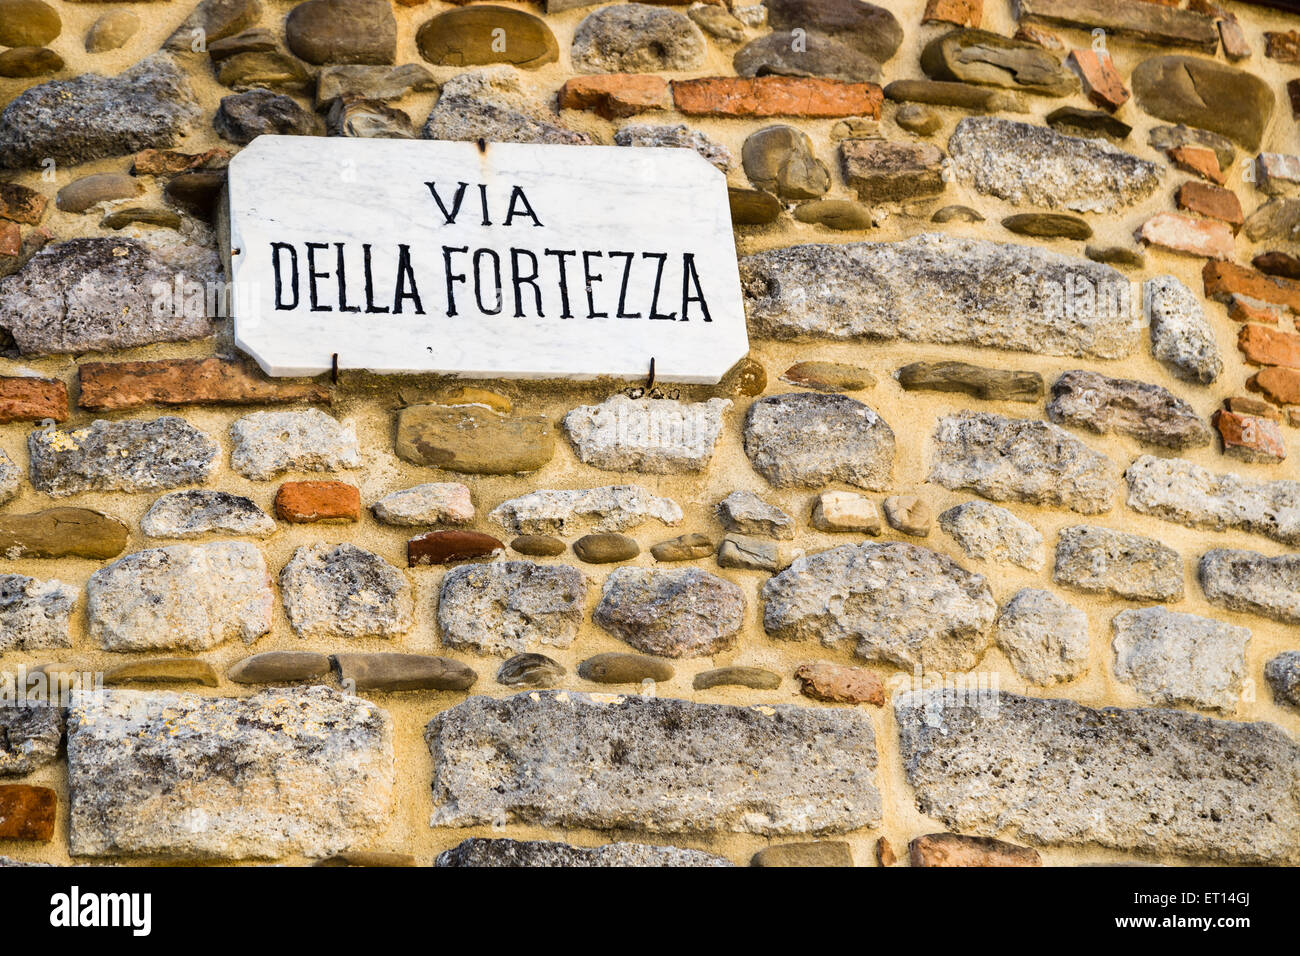 Italian sentence, Via della Fortezza on sign nailed on wall made by smooth stones: meaning is Fortitude road or Fortress road Stock Photo